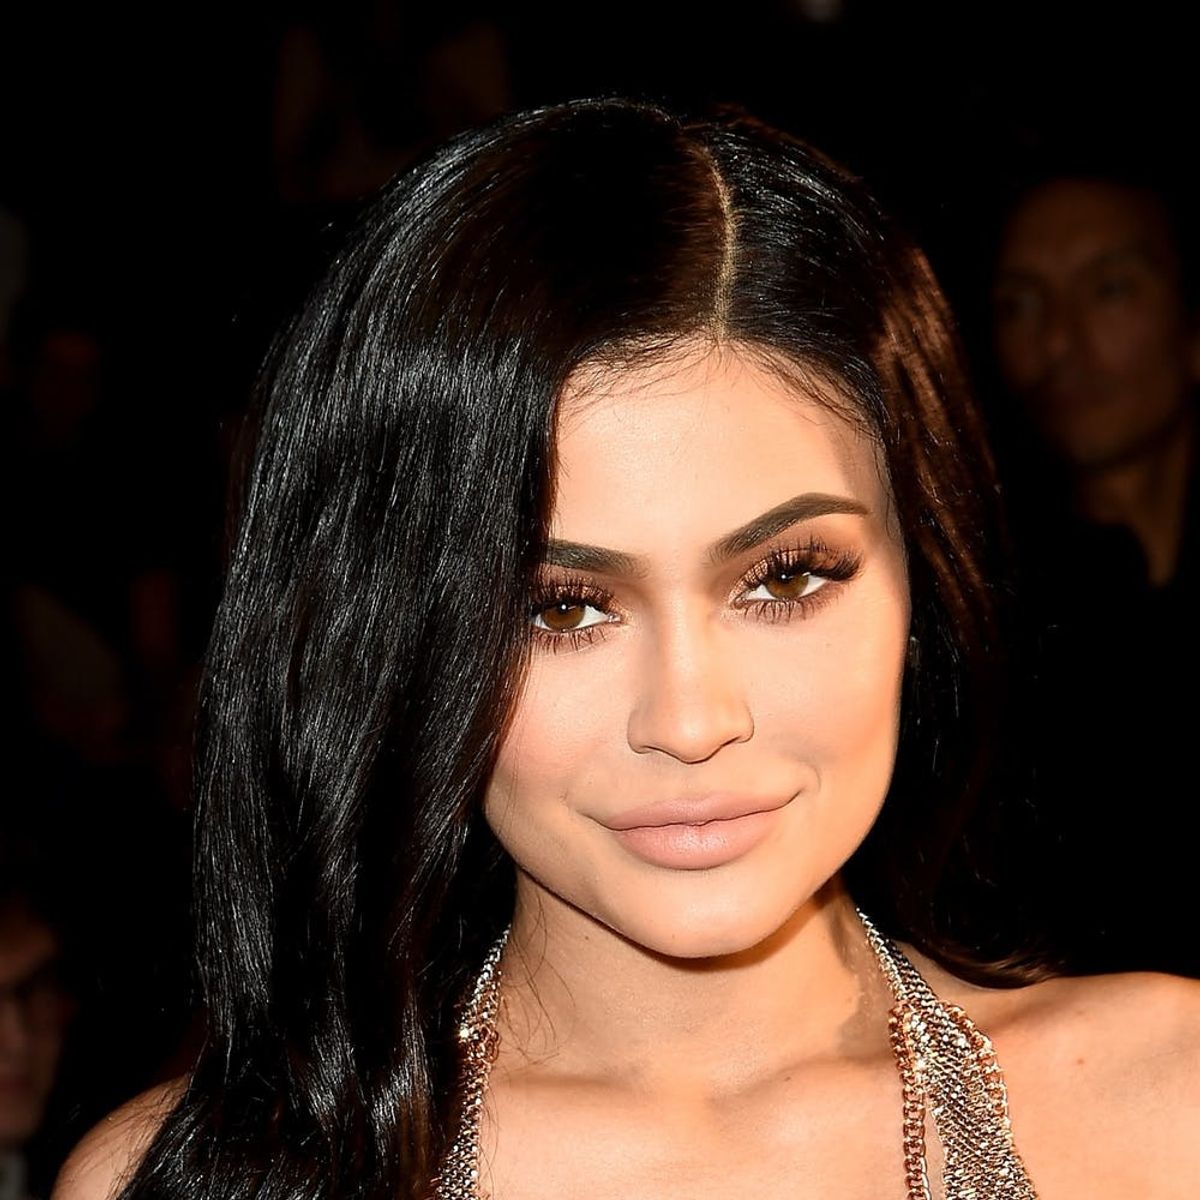 Will Kylie Jenner Reveal Her Pregnancy in Love Magazine?